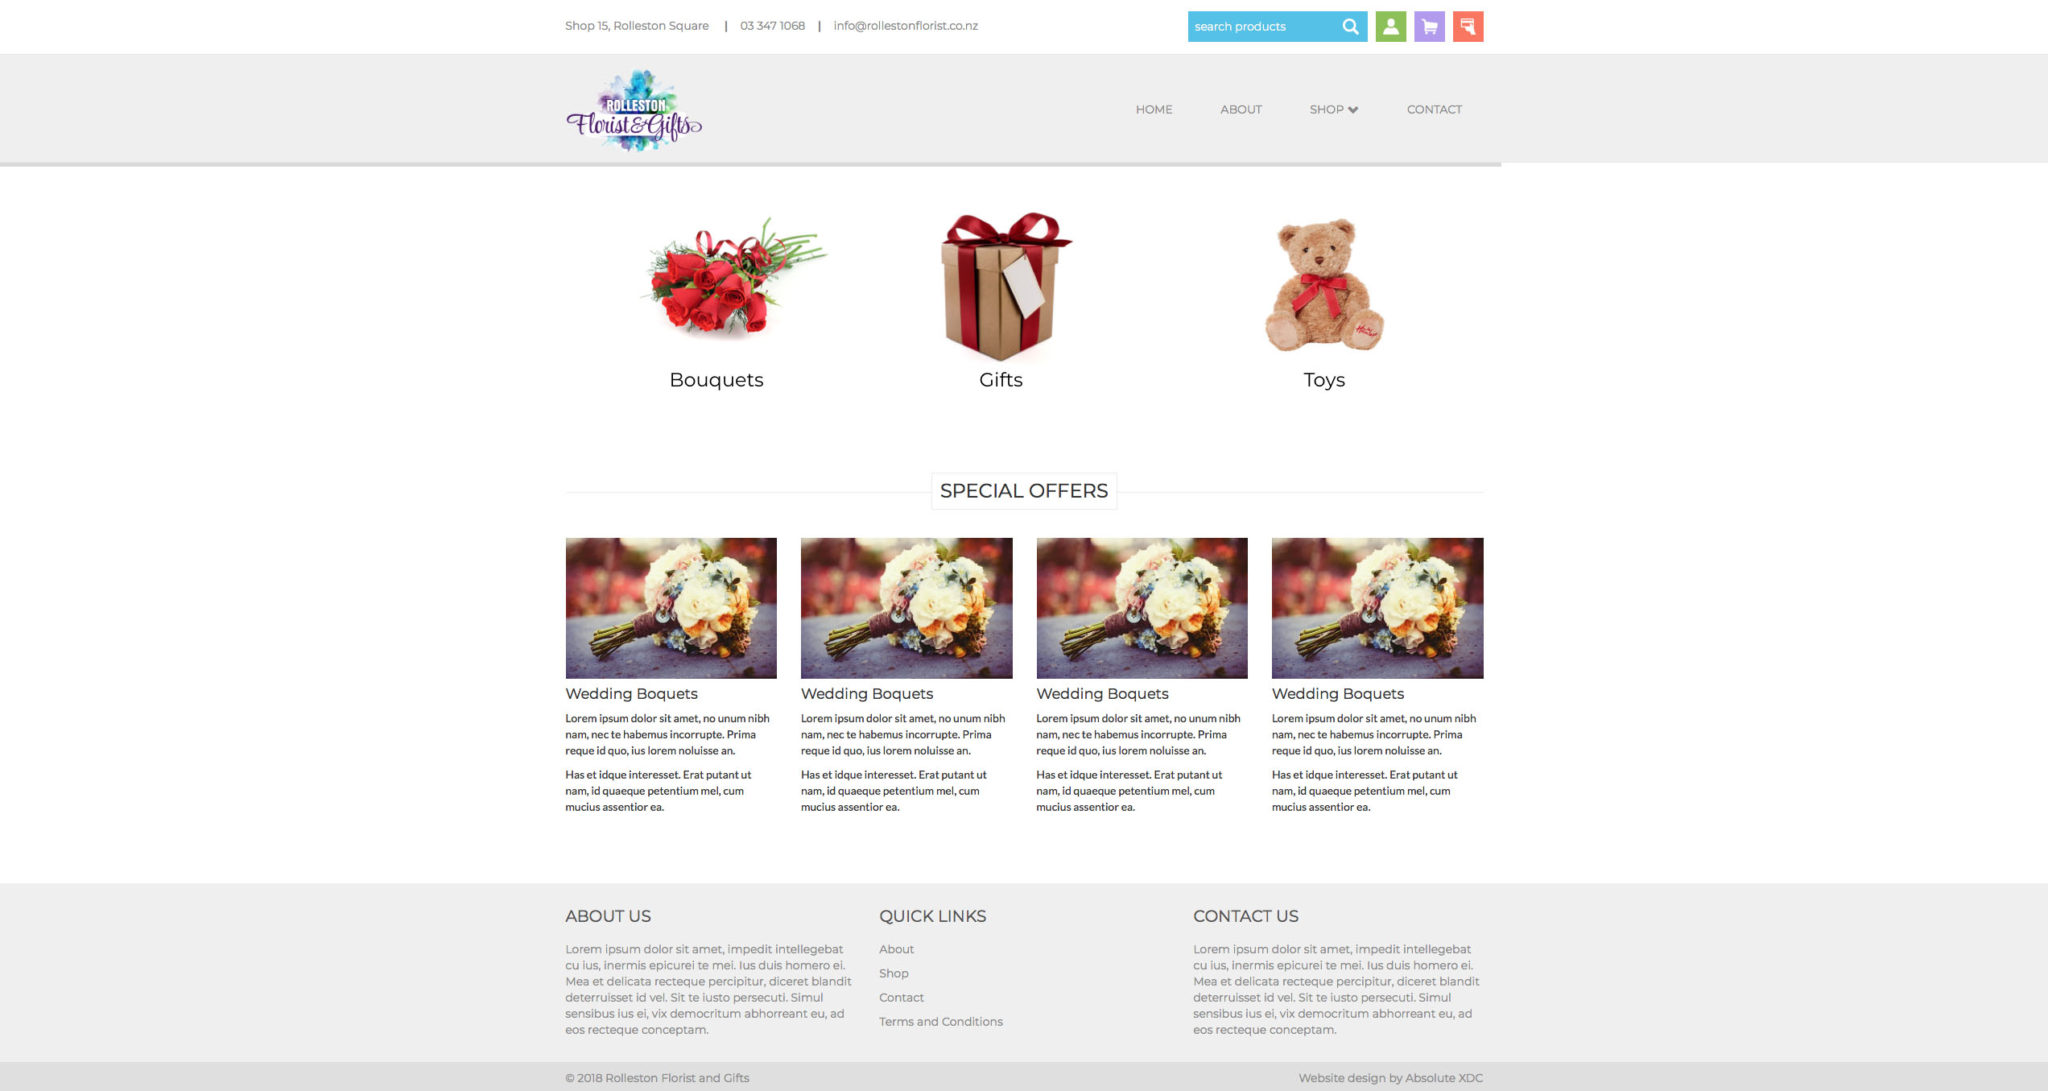 Rolleston Florist and gift's web design and branding expert is XDC the most experienced professional and affordable value for money creative company in the Rolleston Selwyn Christchurch Ashburton Canterbury areas near you. Get the best logo, look better, get noticed quicker and sell stuff faster. Let local Christchurch logo designer web design & developer XDC do the best design work and marketing SEO for your small to medium business or startup business. Turbocharge your next printing or web project with an awesome advert that will get you noticed quicker!